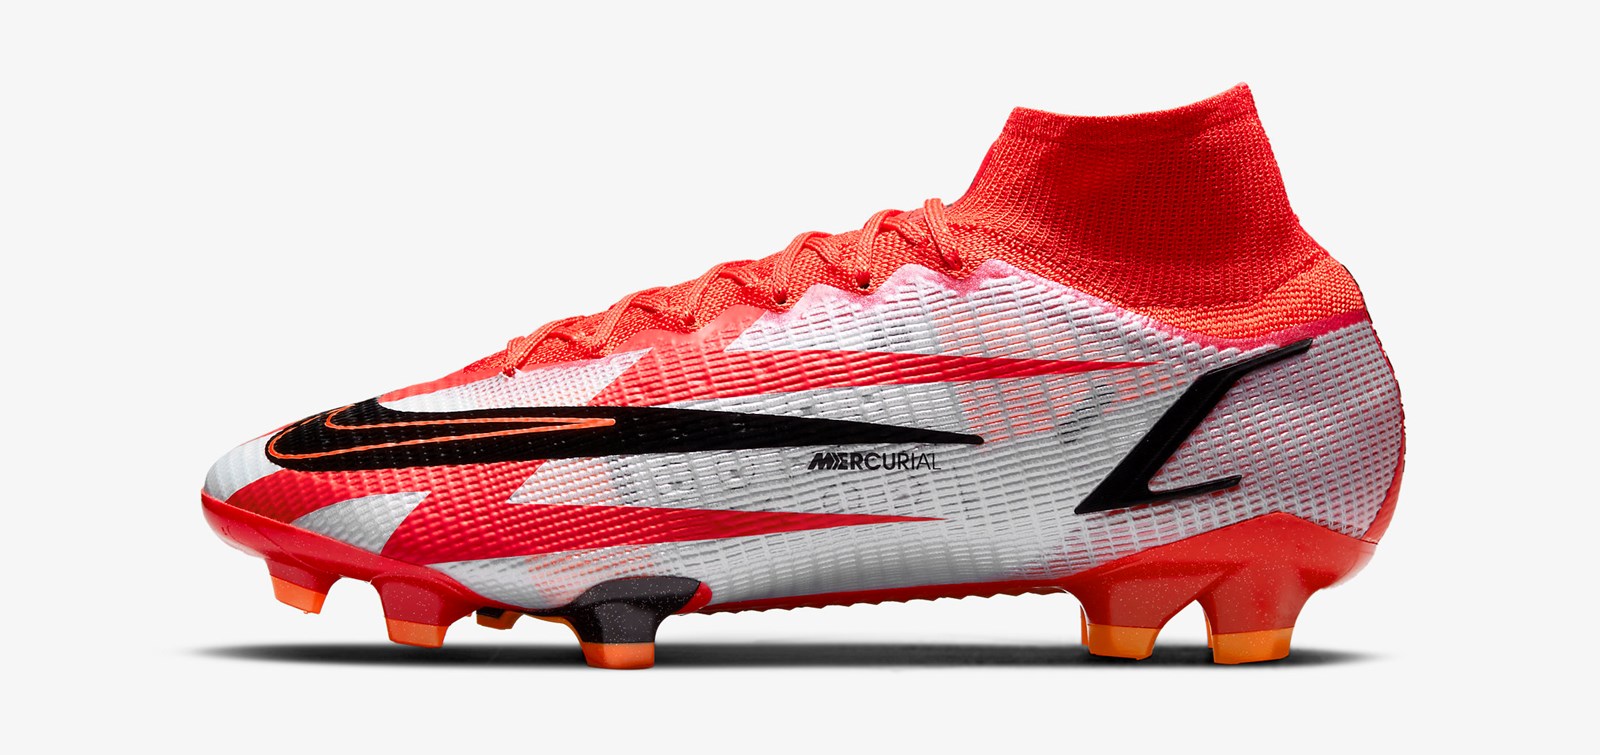 cr7 boots 2020